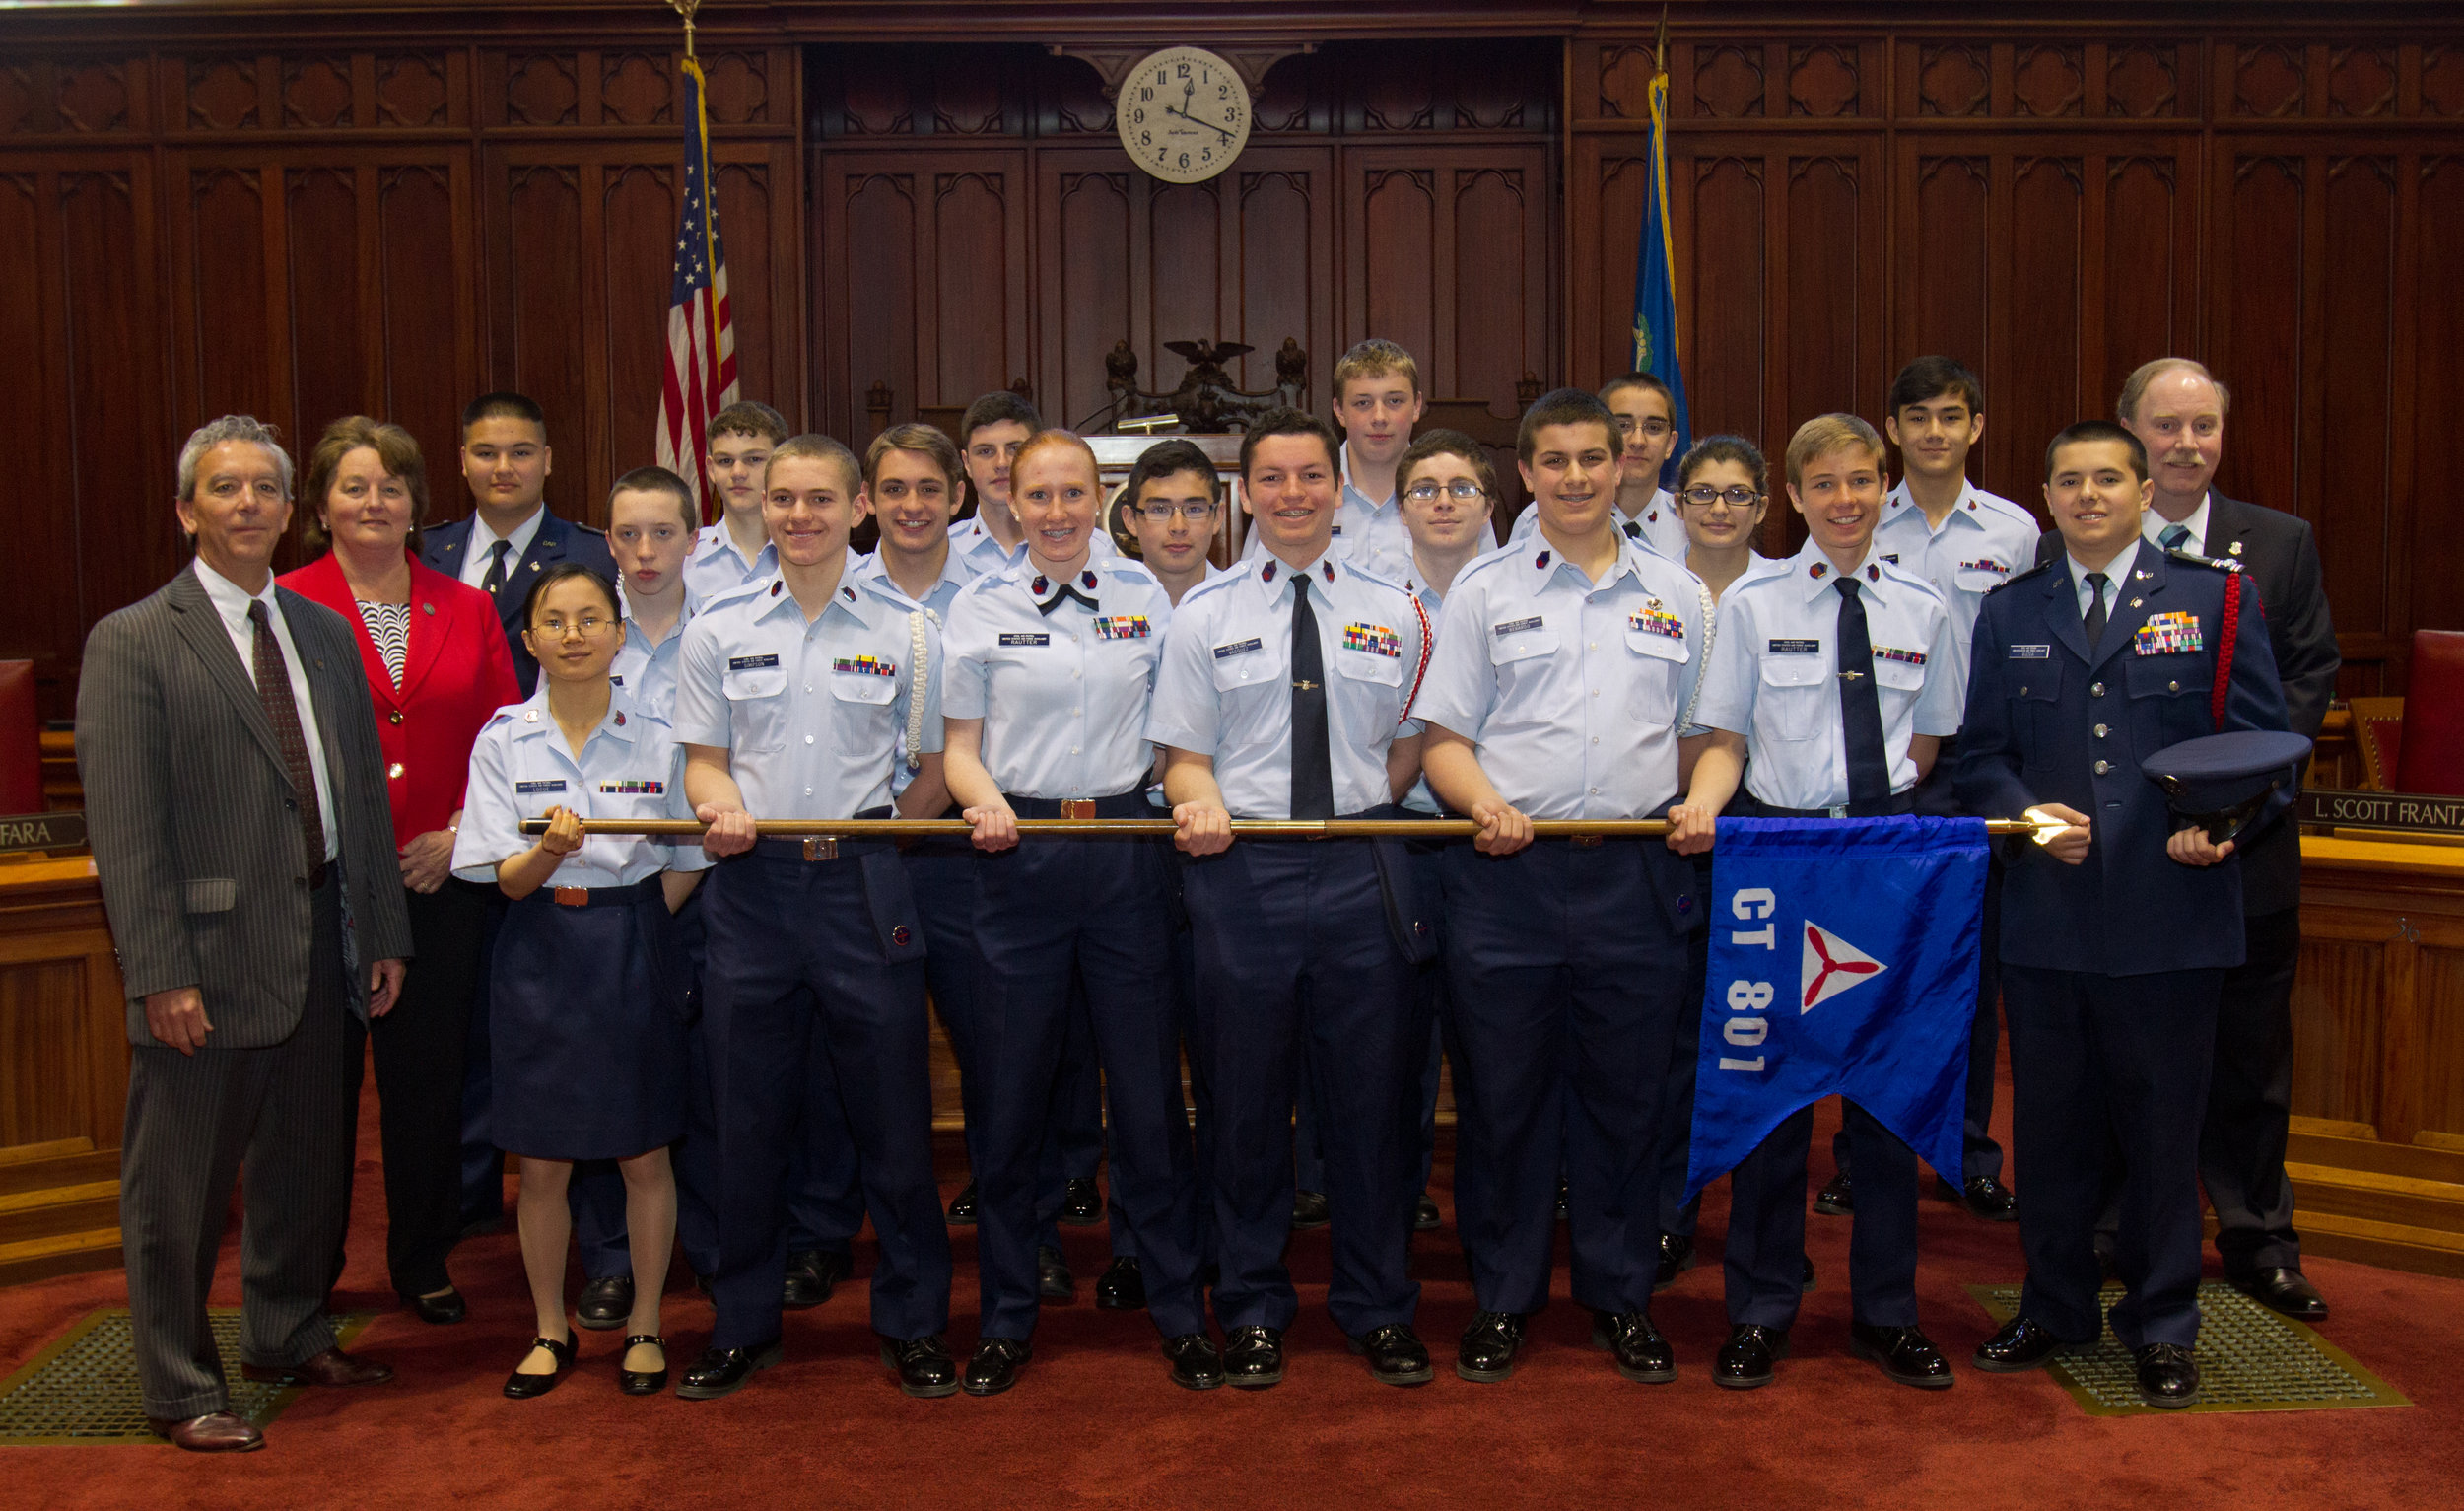 giegler-and-smith-meet-with-civil-air-patrol-cadets--session-042814-4164_14078724943_o.jpg